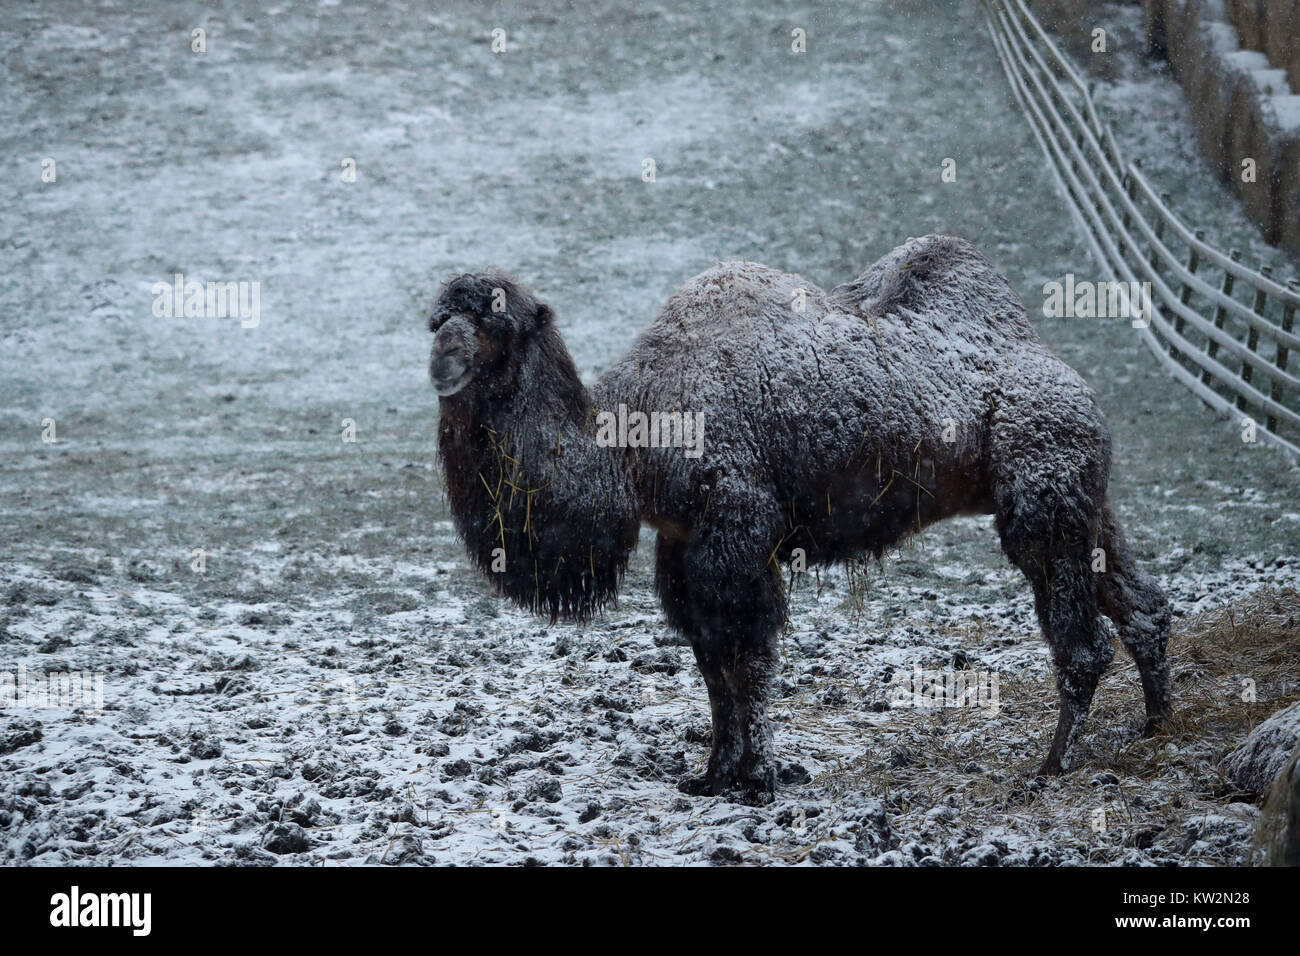 A camel stands in the snow on a farm near Richmond, North Yorkshire, after Britain saw one of the coldest nights of the year with temperatures falling to minus 12.3C at Loch Glascarnoch in the Scottish Highlands overnight and heavy snow expected over parts of the north of England. Stock Photo